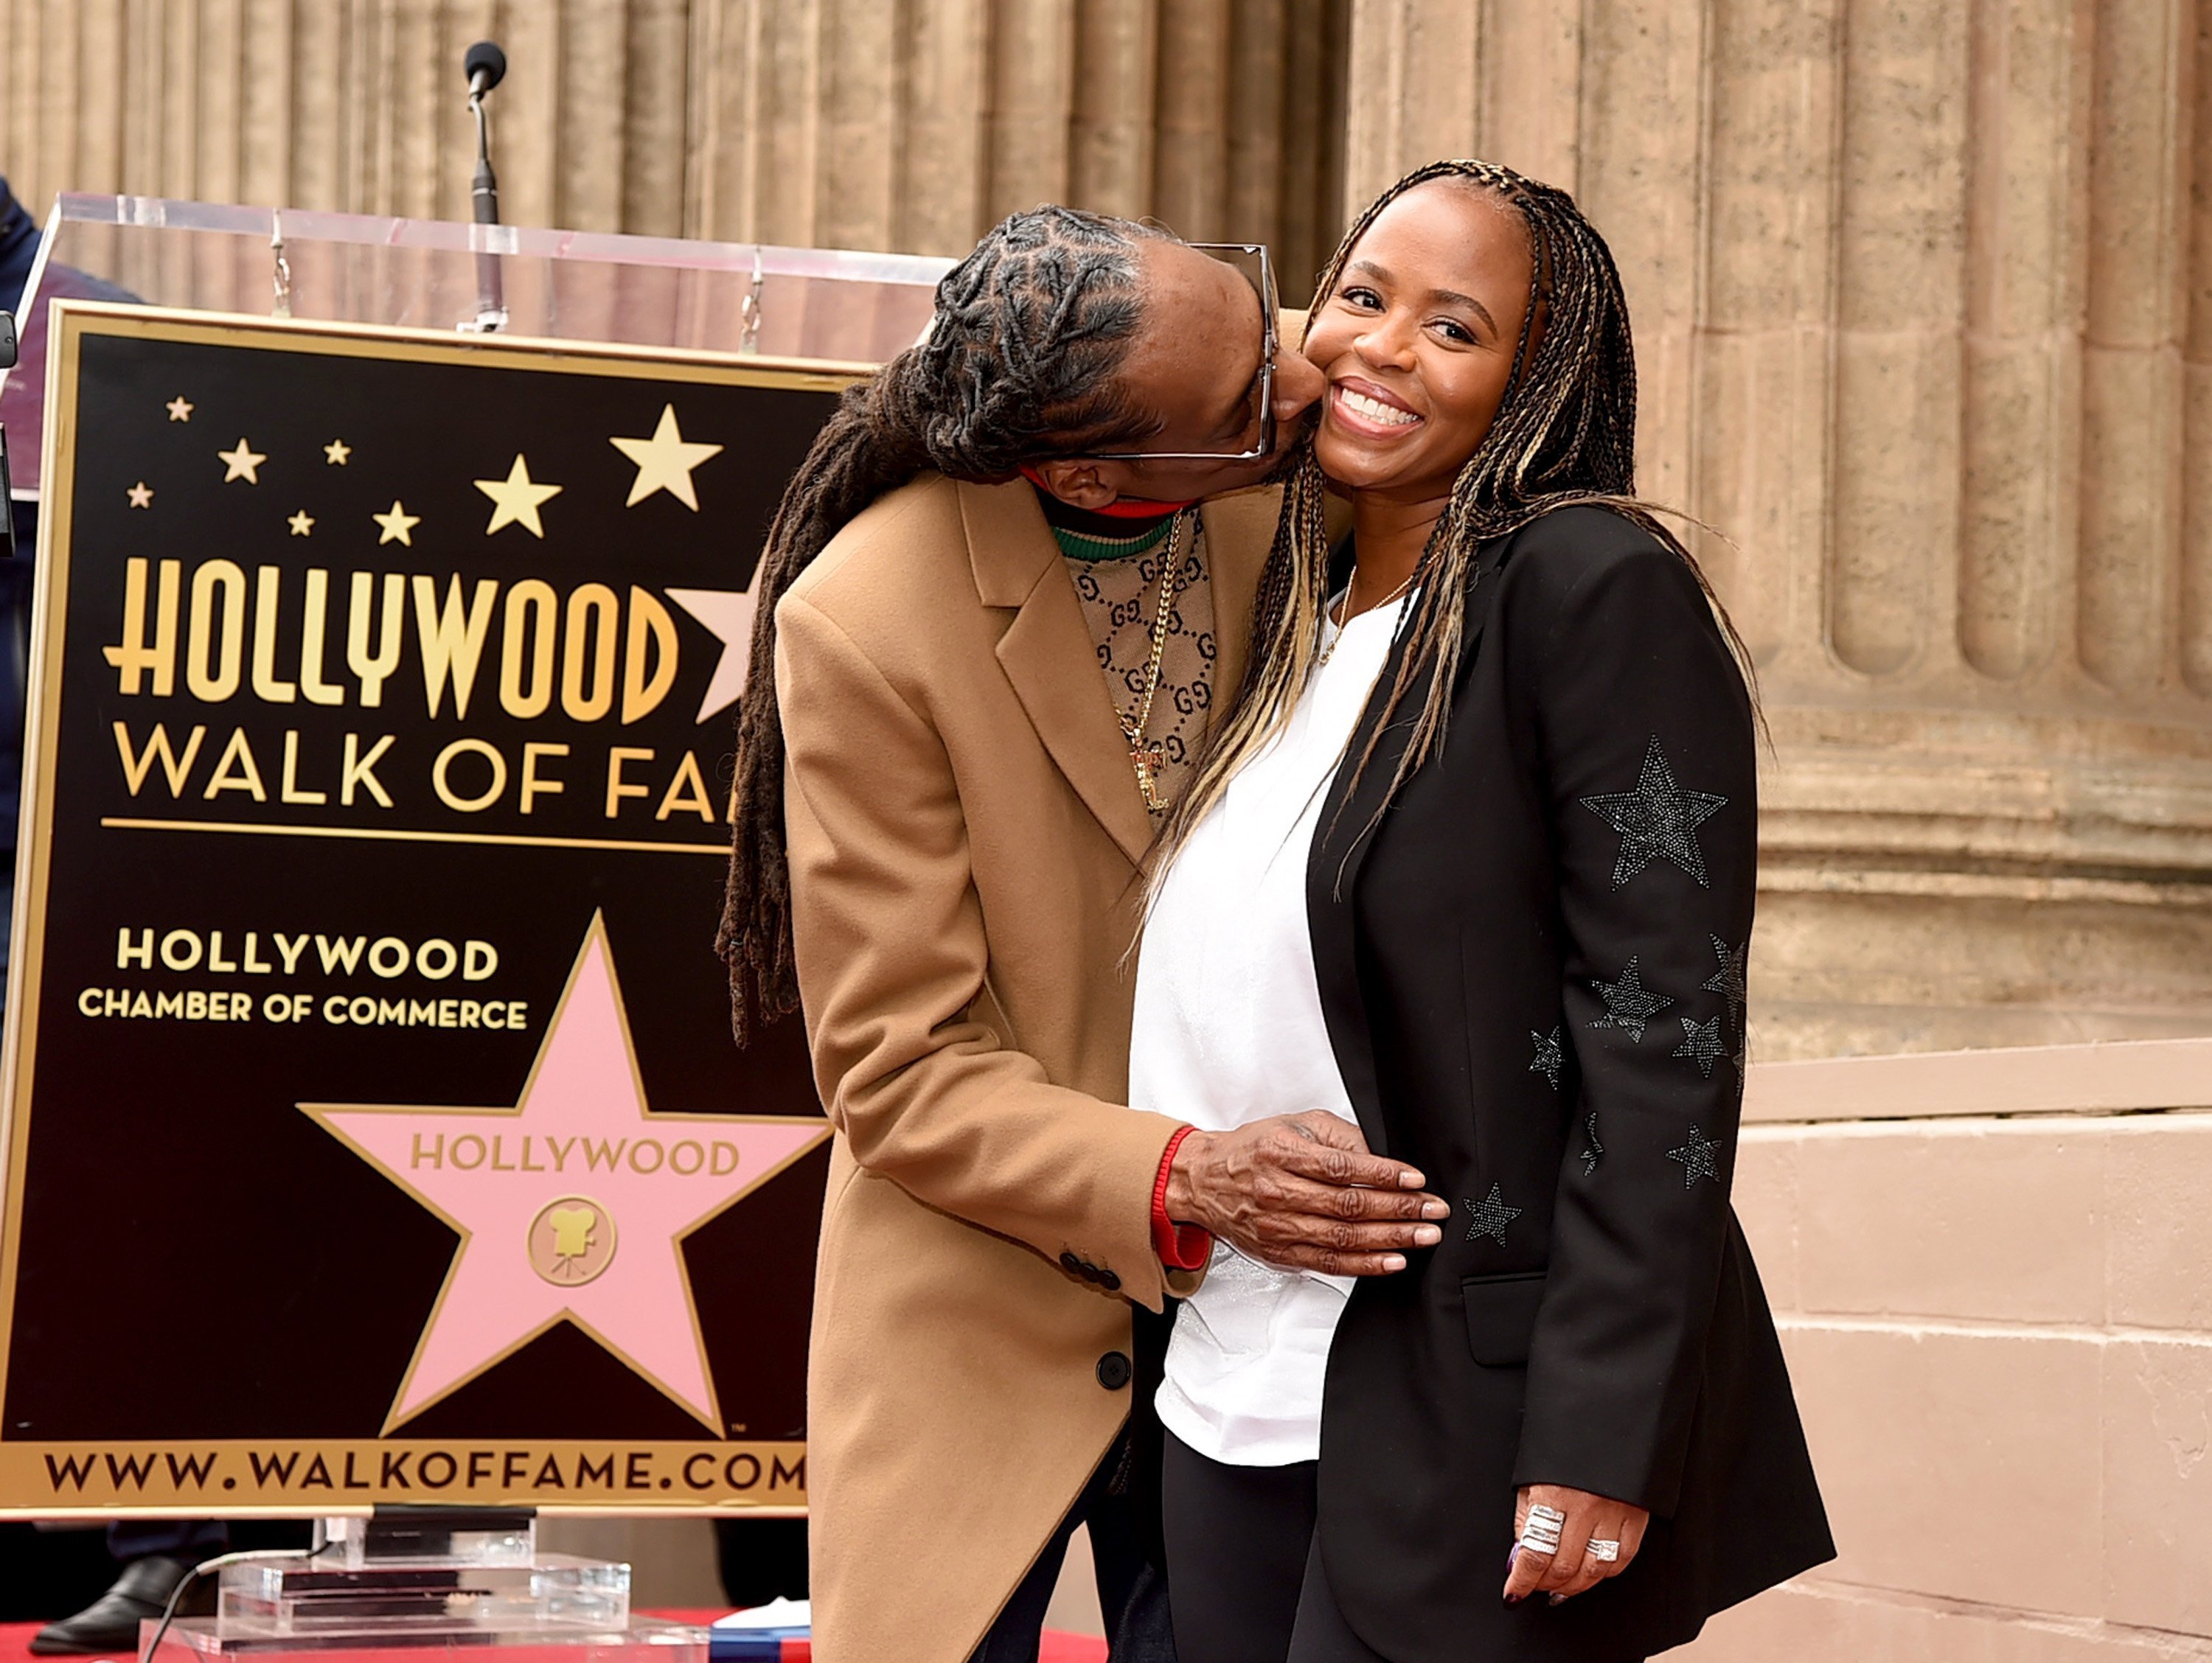 Snoop Dogg, with his wife Shante Broadus, is honored with a star on The Hollywood Walk Of Fame on Hollywood Boulevard on November 19, 2018. | Photo: GettyImages